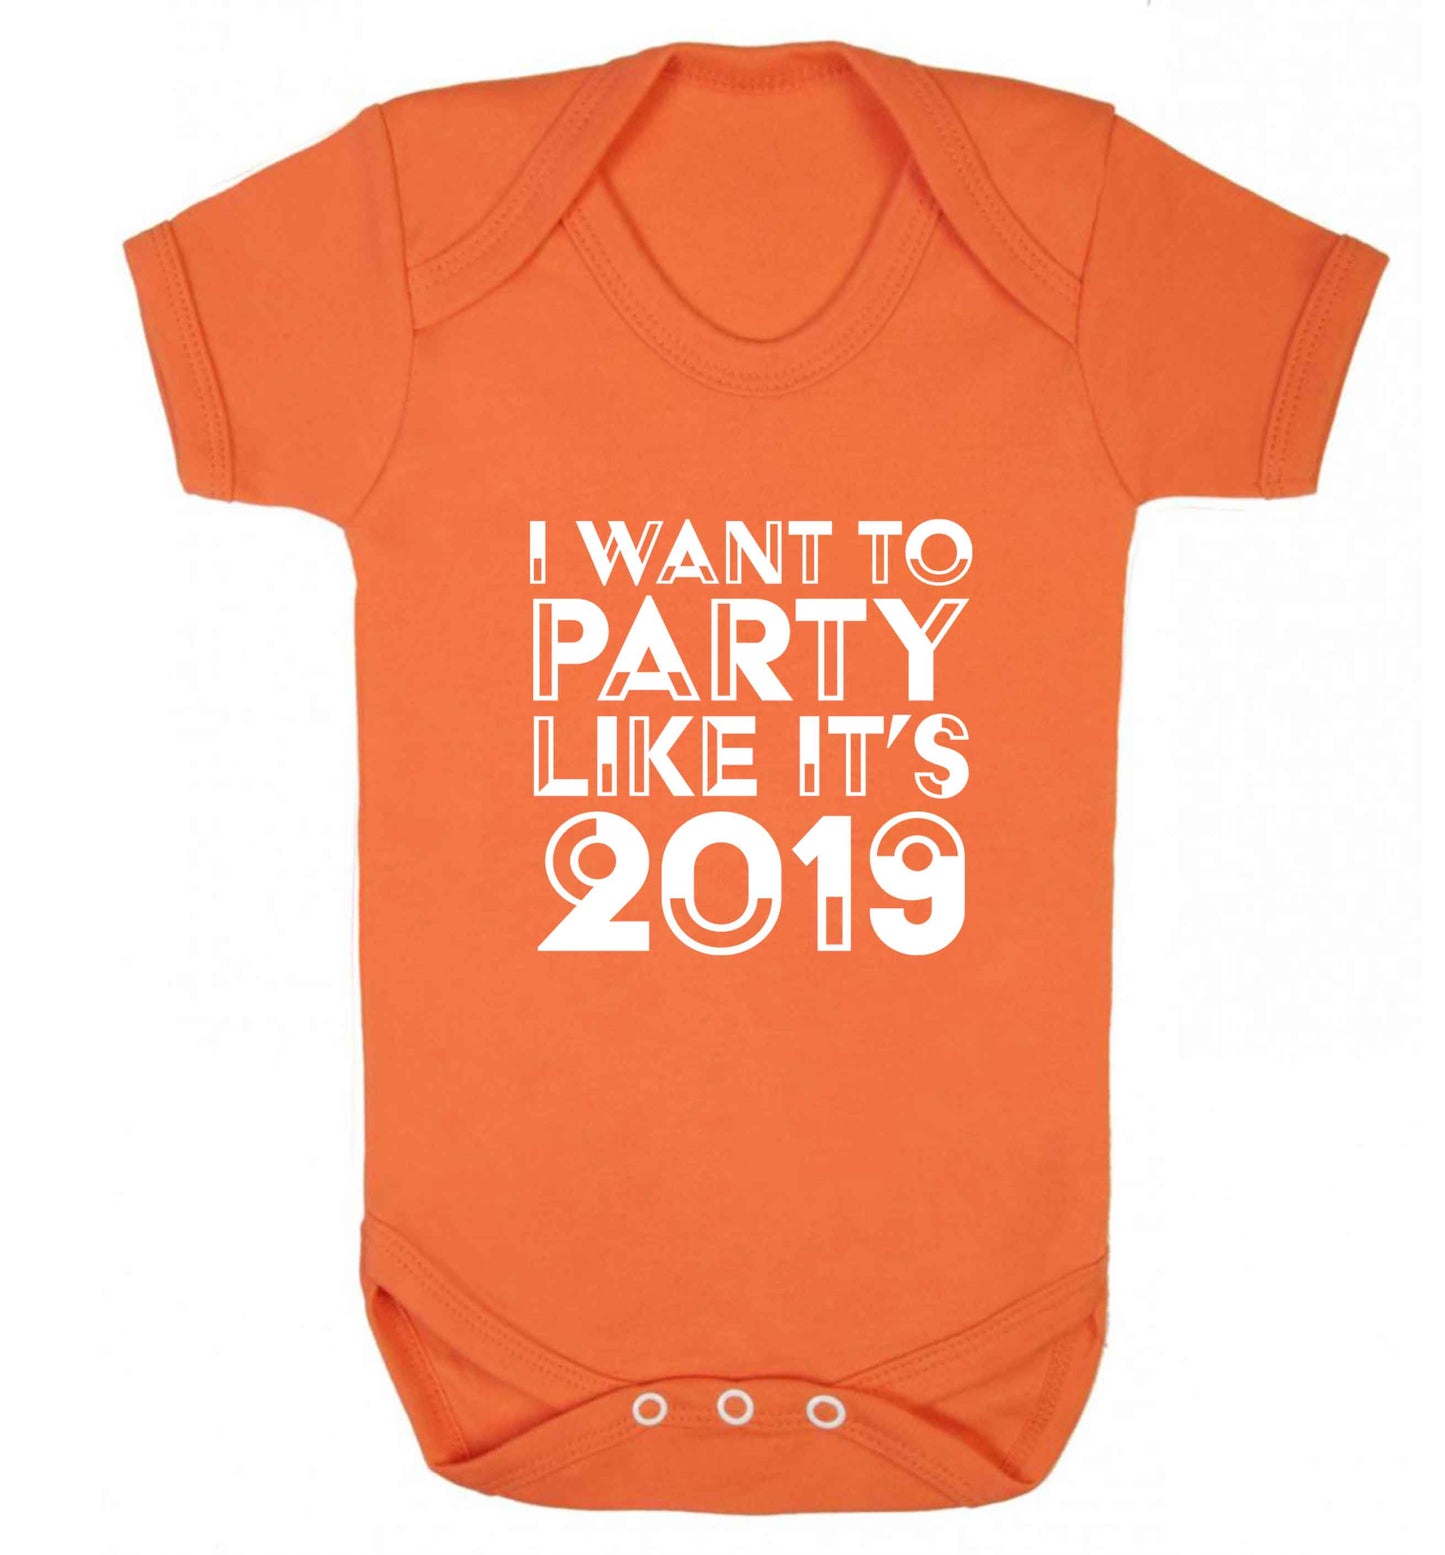 I want to party like it's 2019 baby vest orange 18-24 months